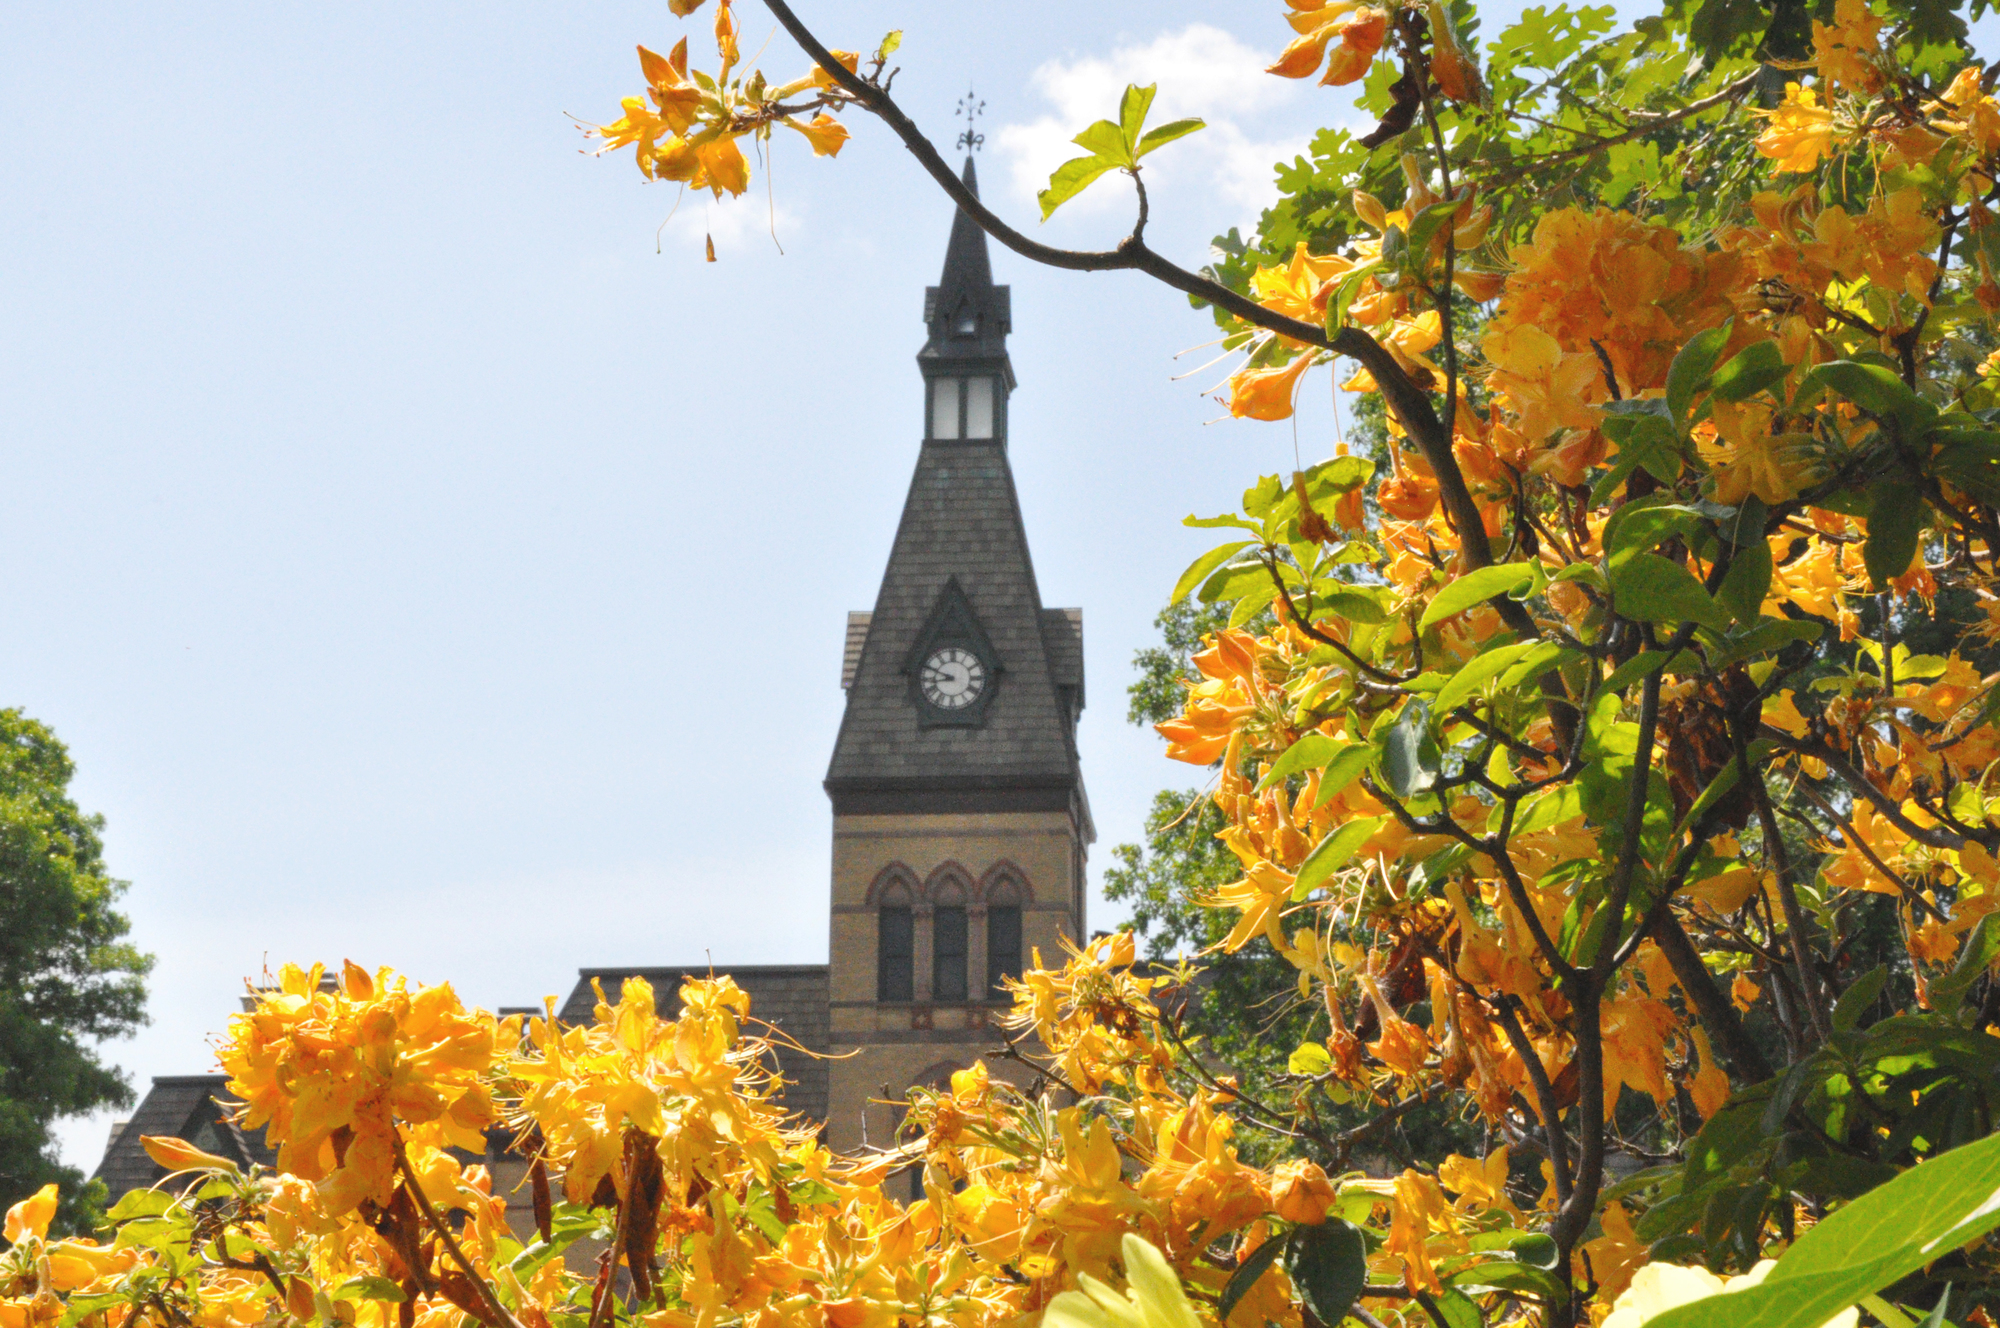 Spire of Old Main with orange flowers